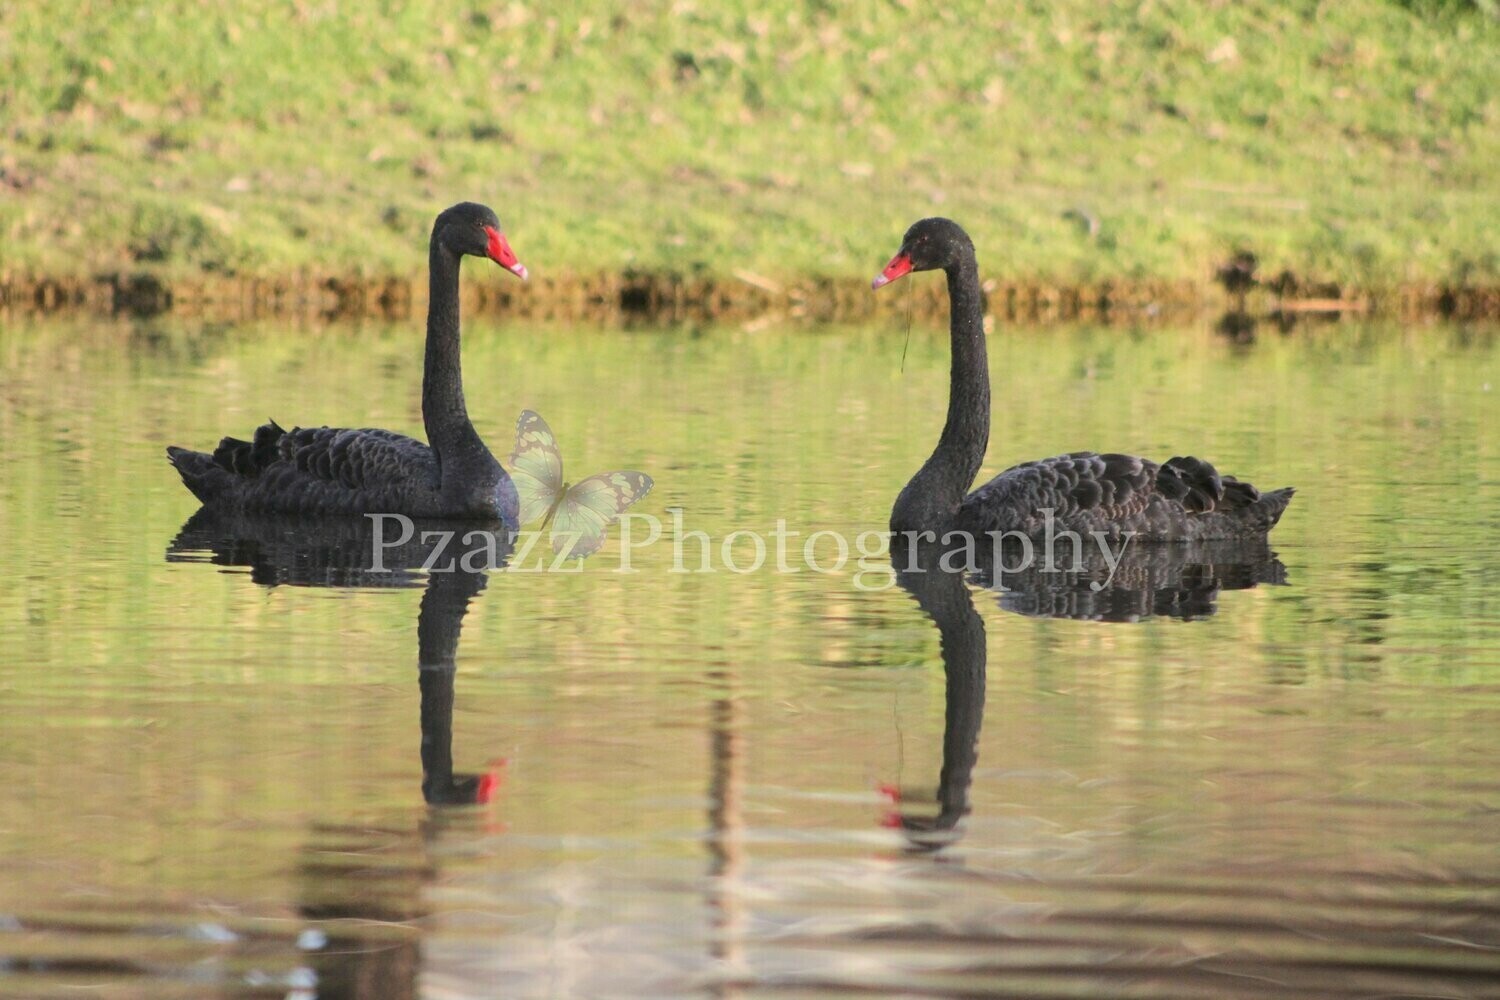 Pzazz Photography - Swans And Babies - Specially ordered for you. Delivery is approximately 4 - 6 weeks.